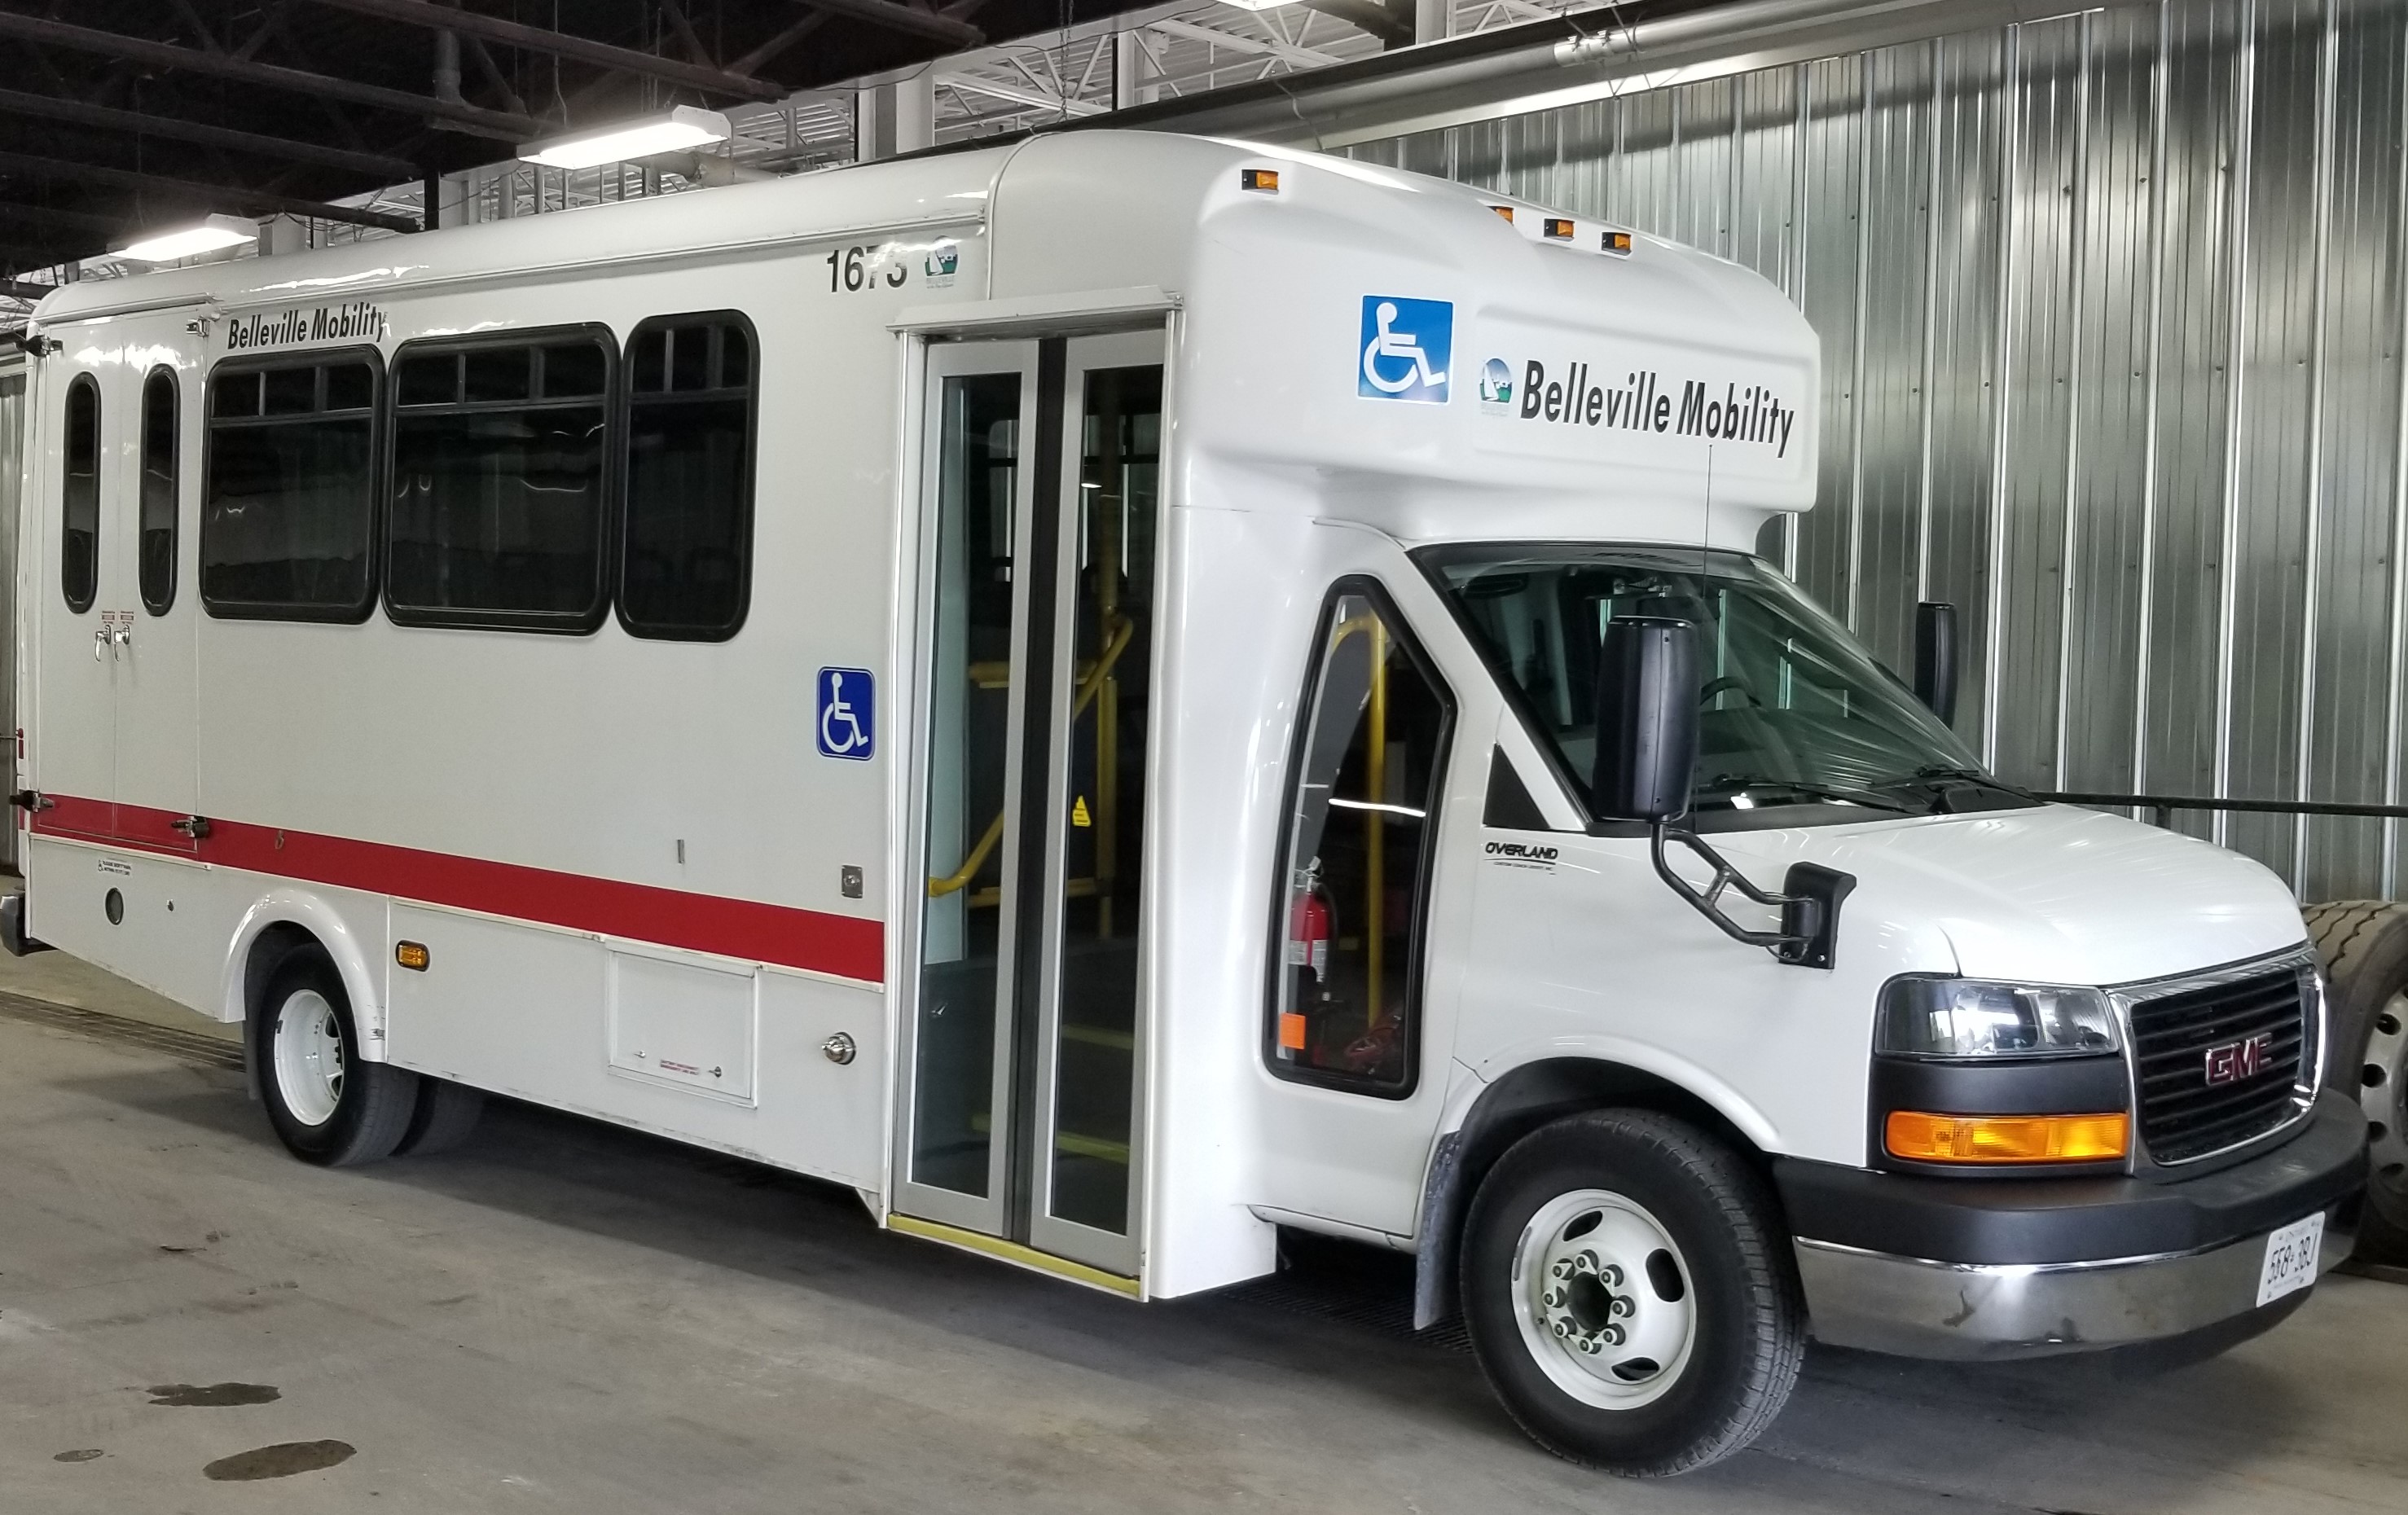 The Mobility Bus